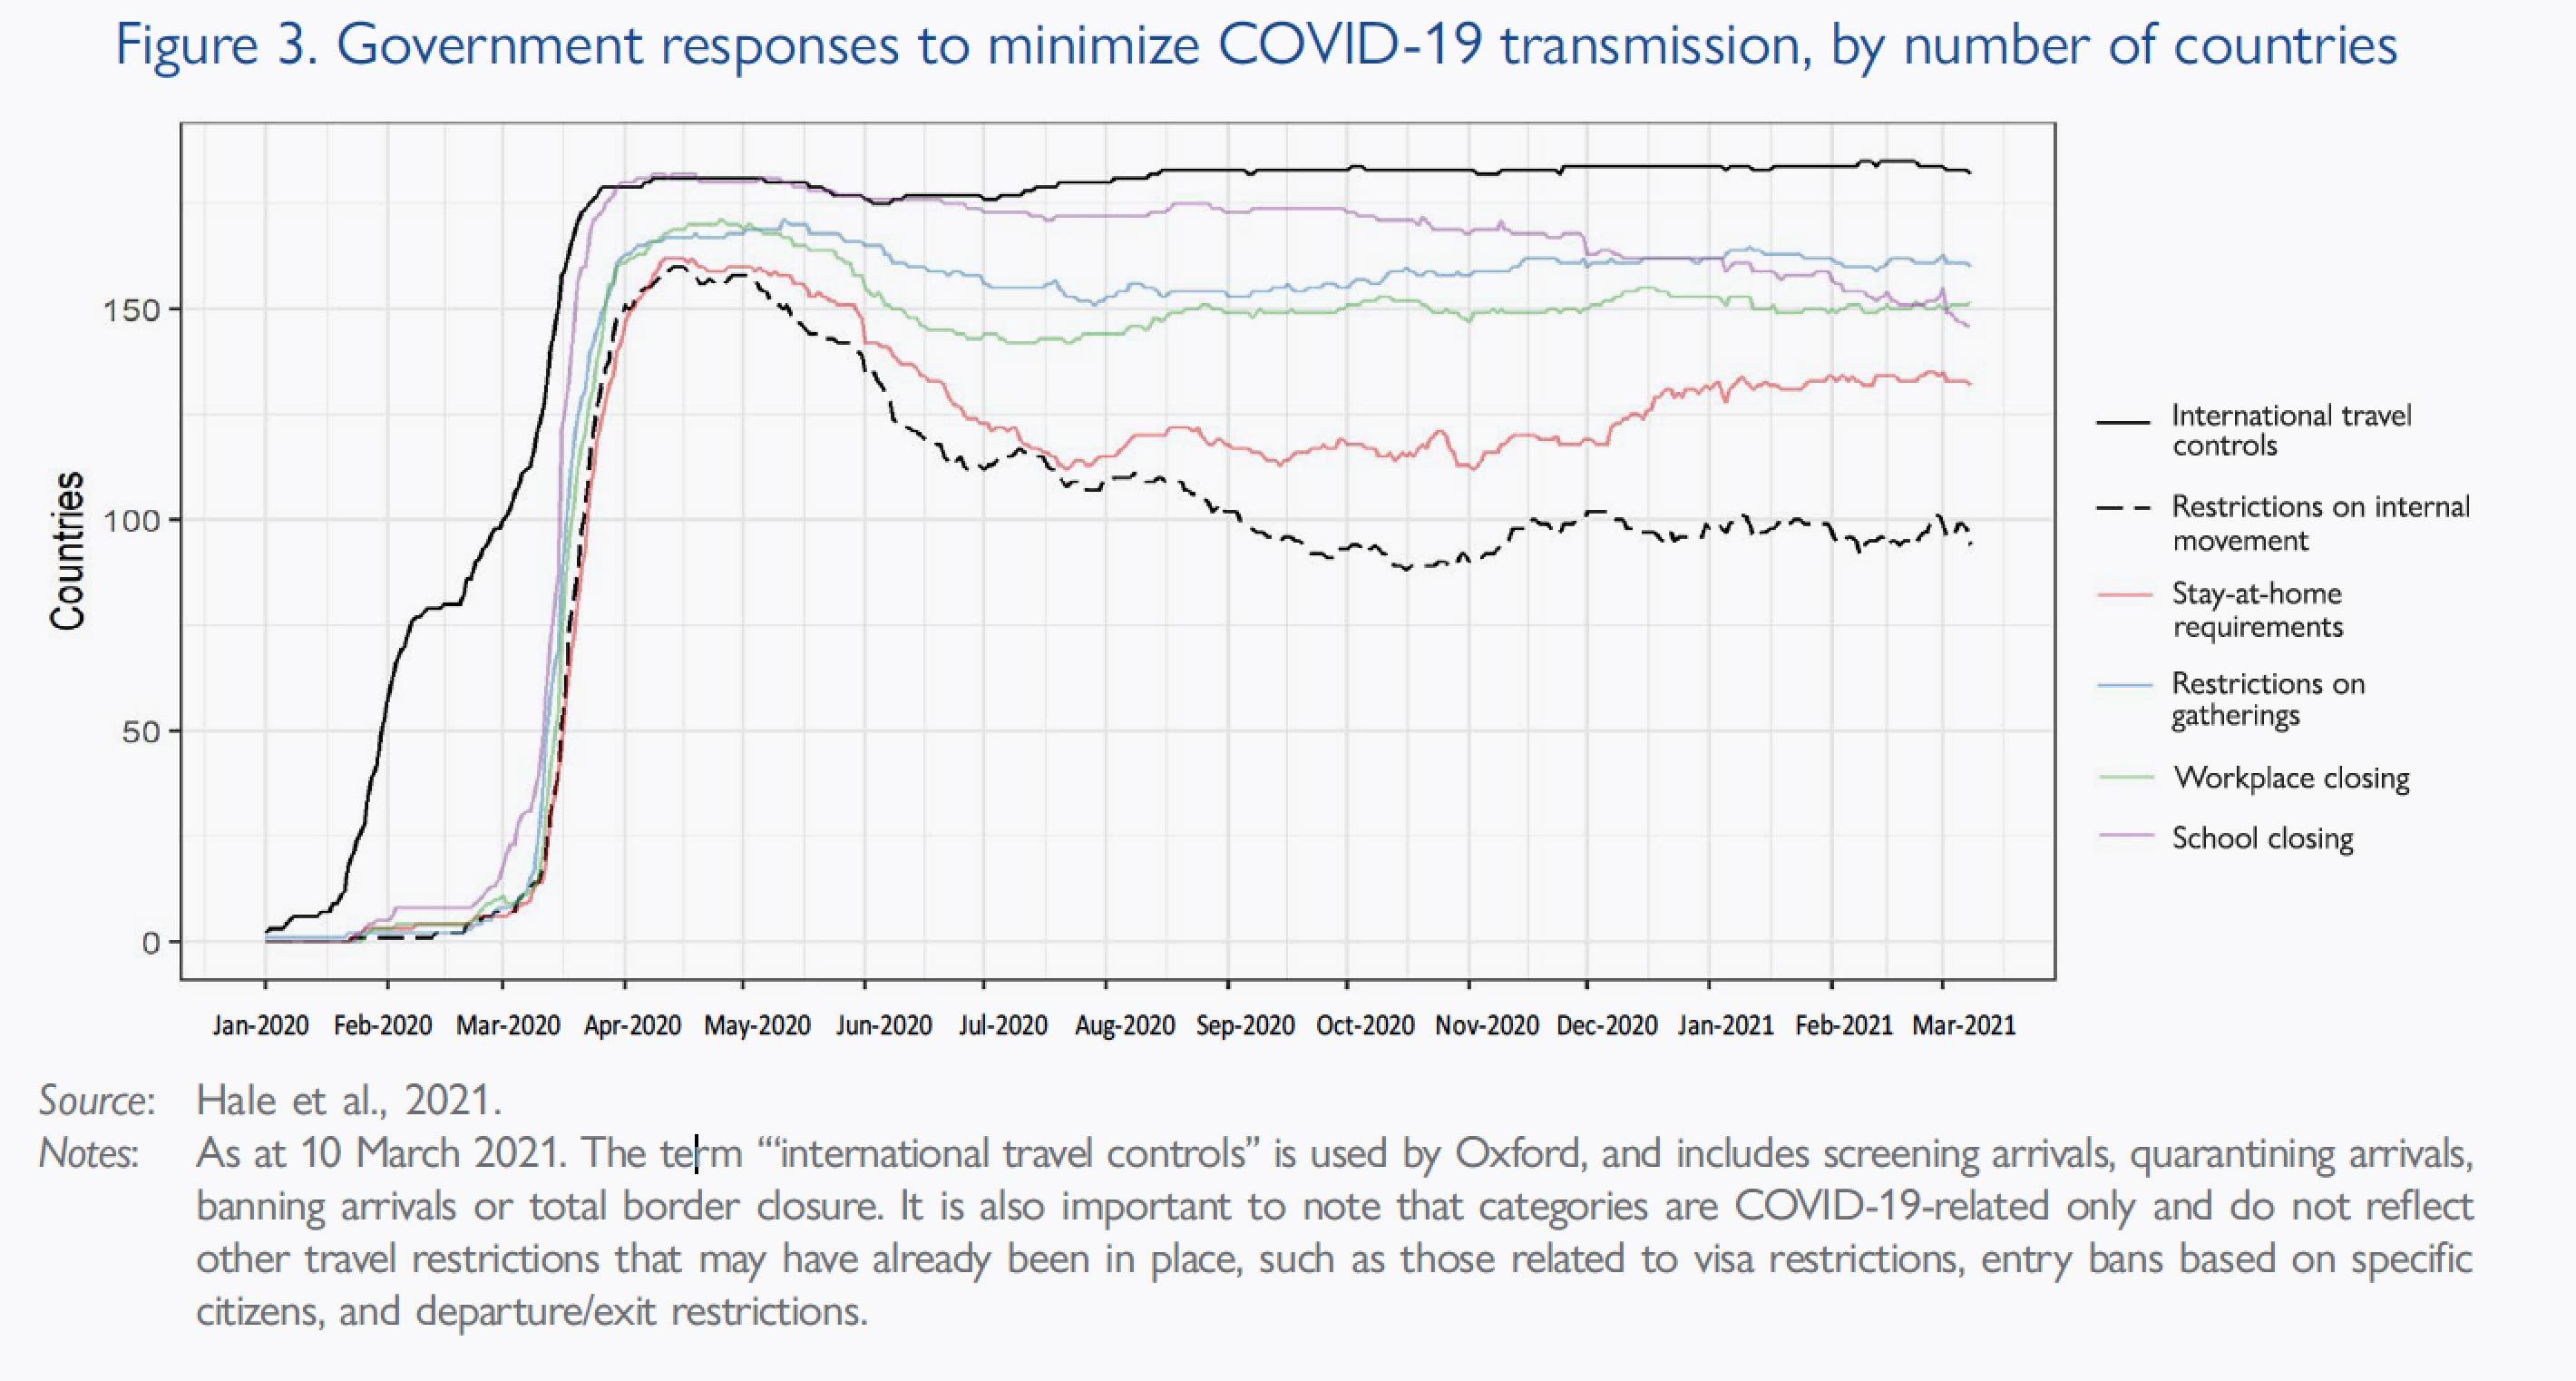 Government responses to minimize COVID-19 transmission, by number of countries